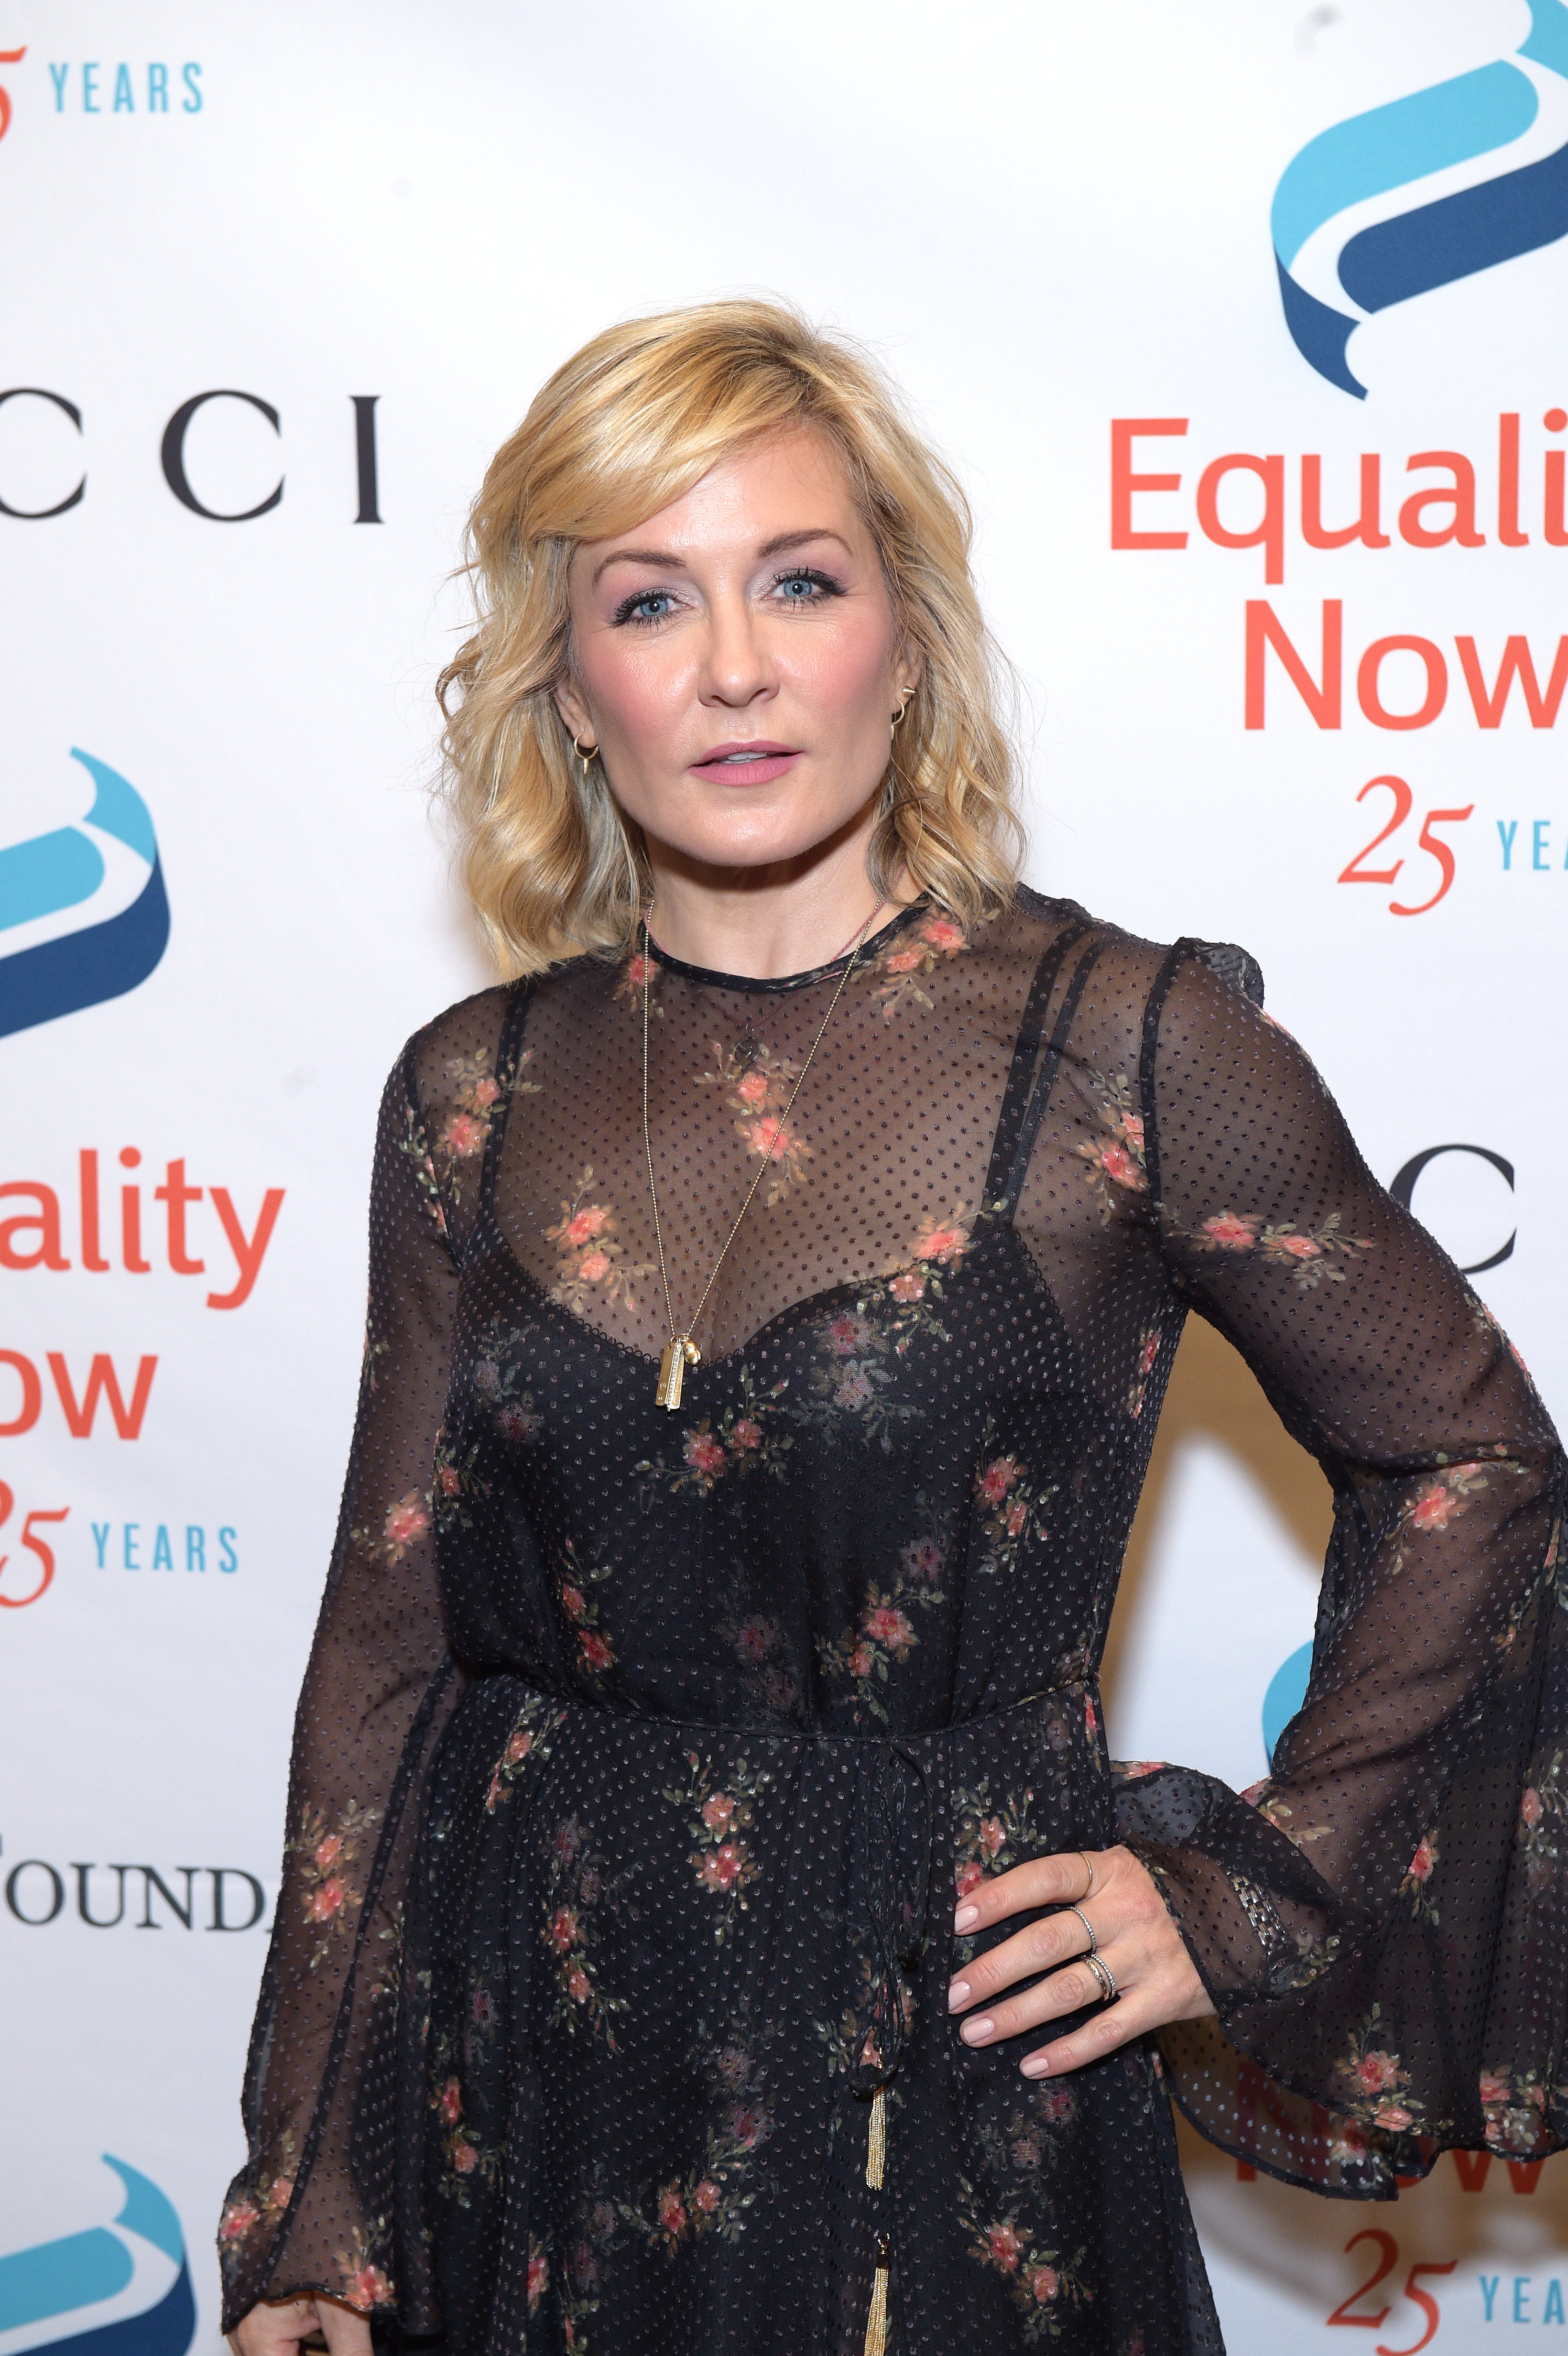 Amy Carlson at the "Make Equality Reality" Gala at Gotham Hall on October 30, 2017 in New York City | Photo: GettyImages